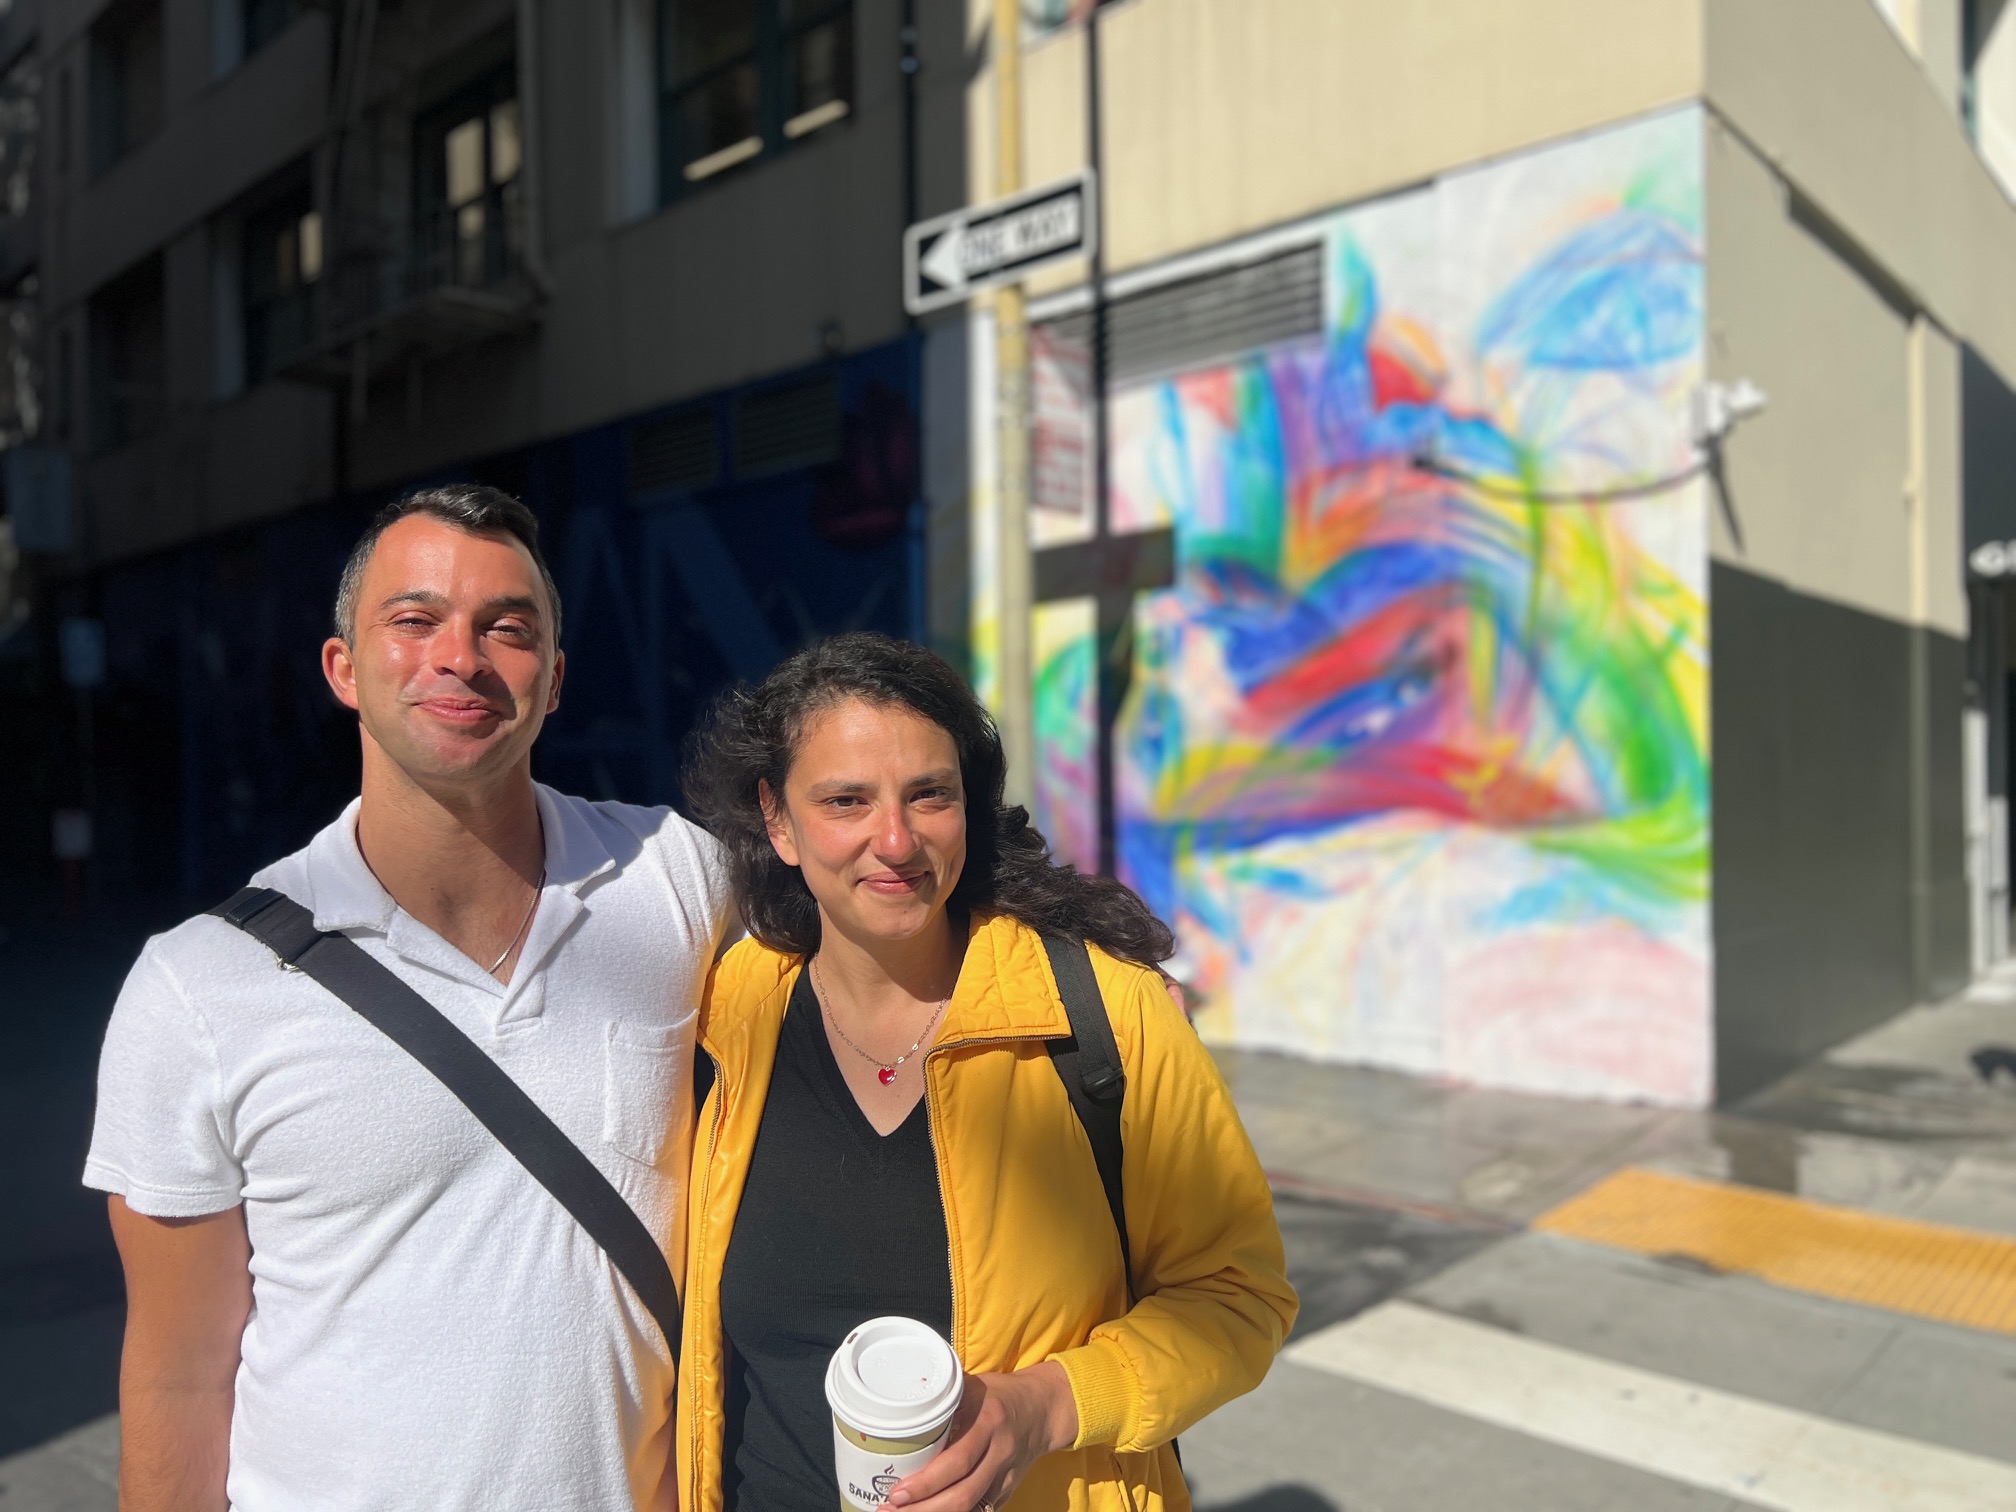 A smiling man and woman on a sunny street; colorful mural in the background.